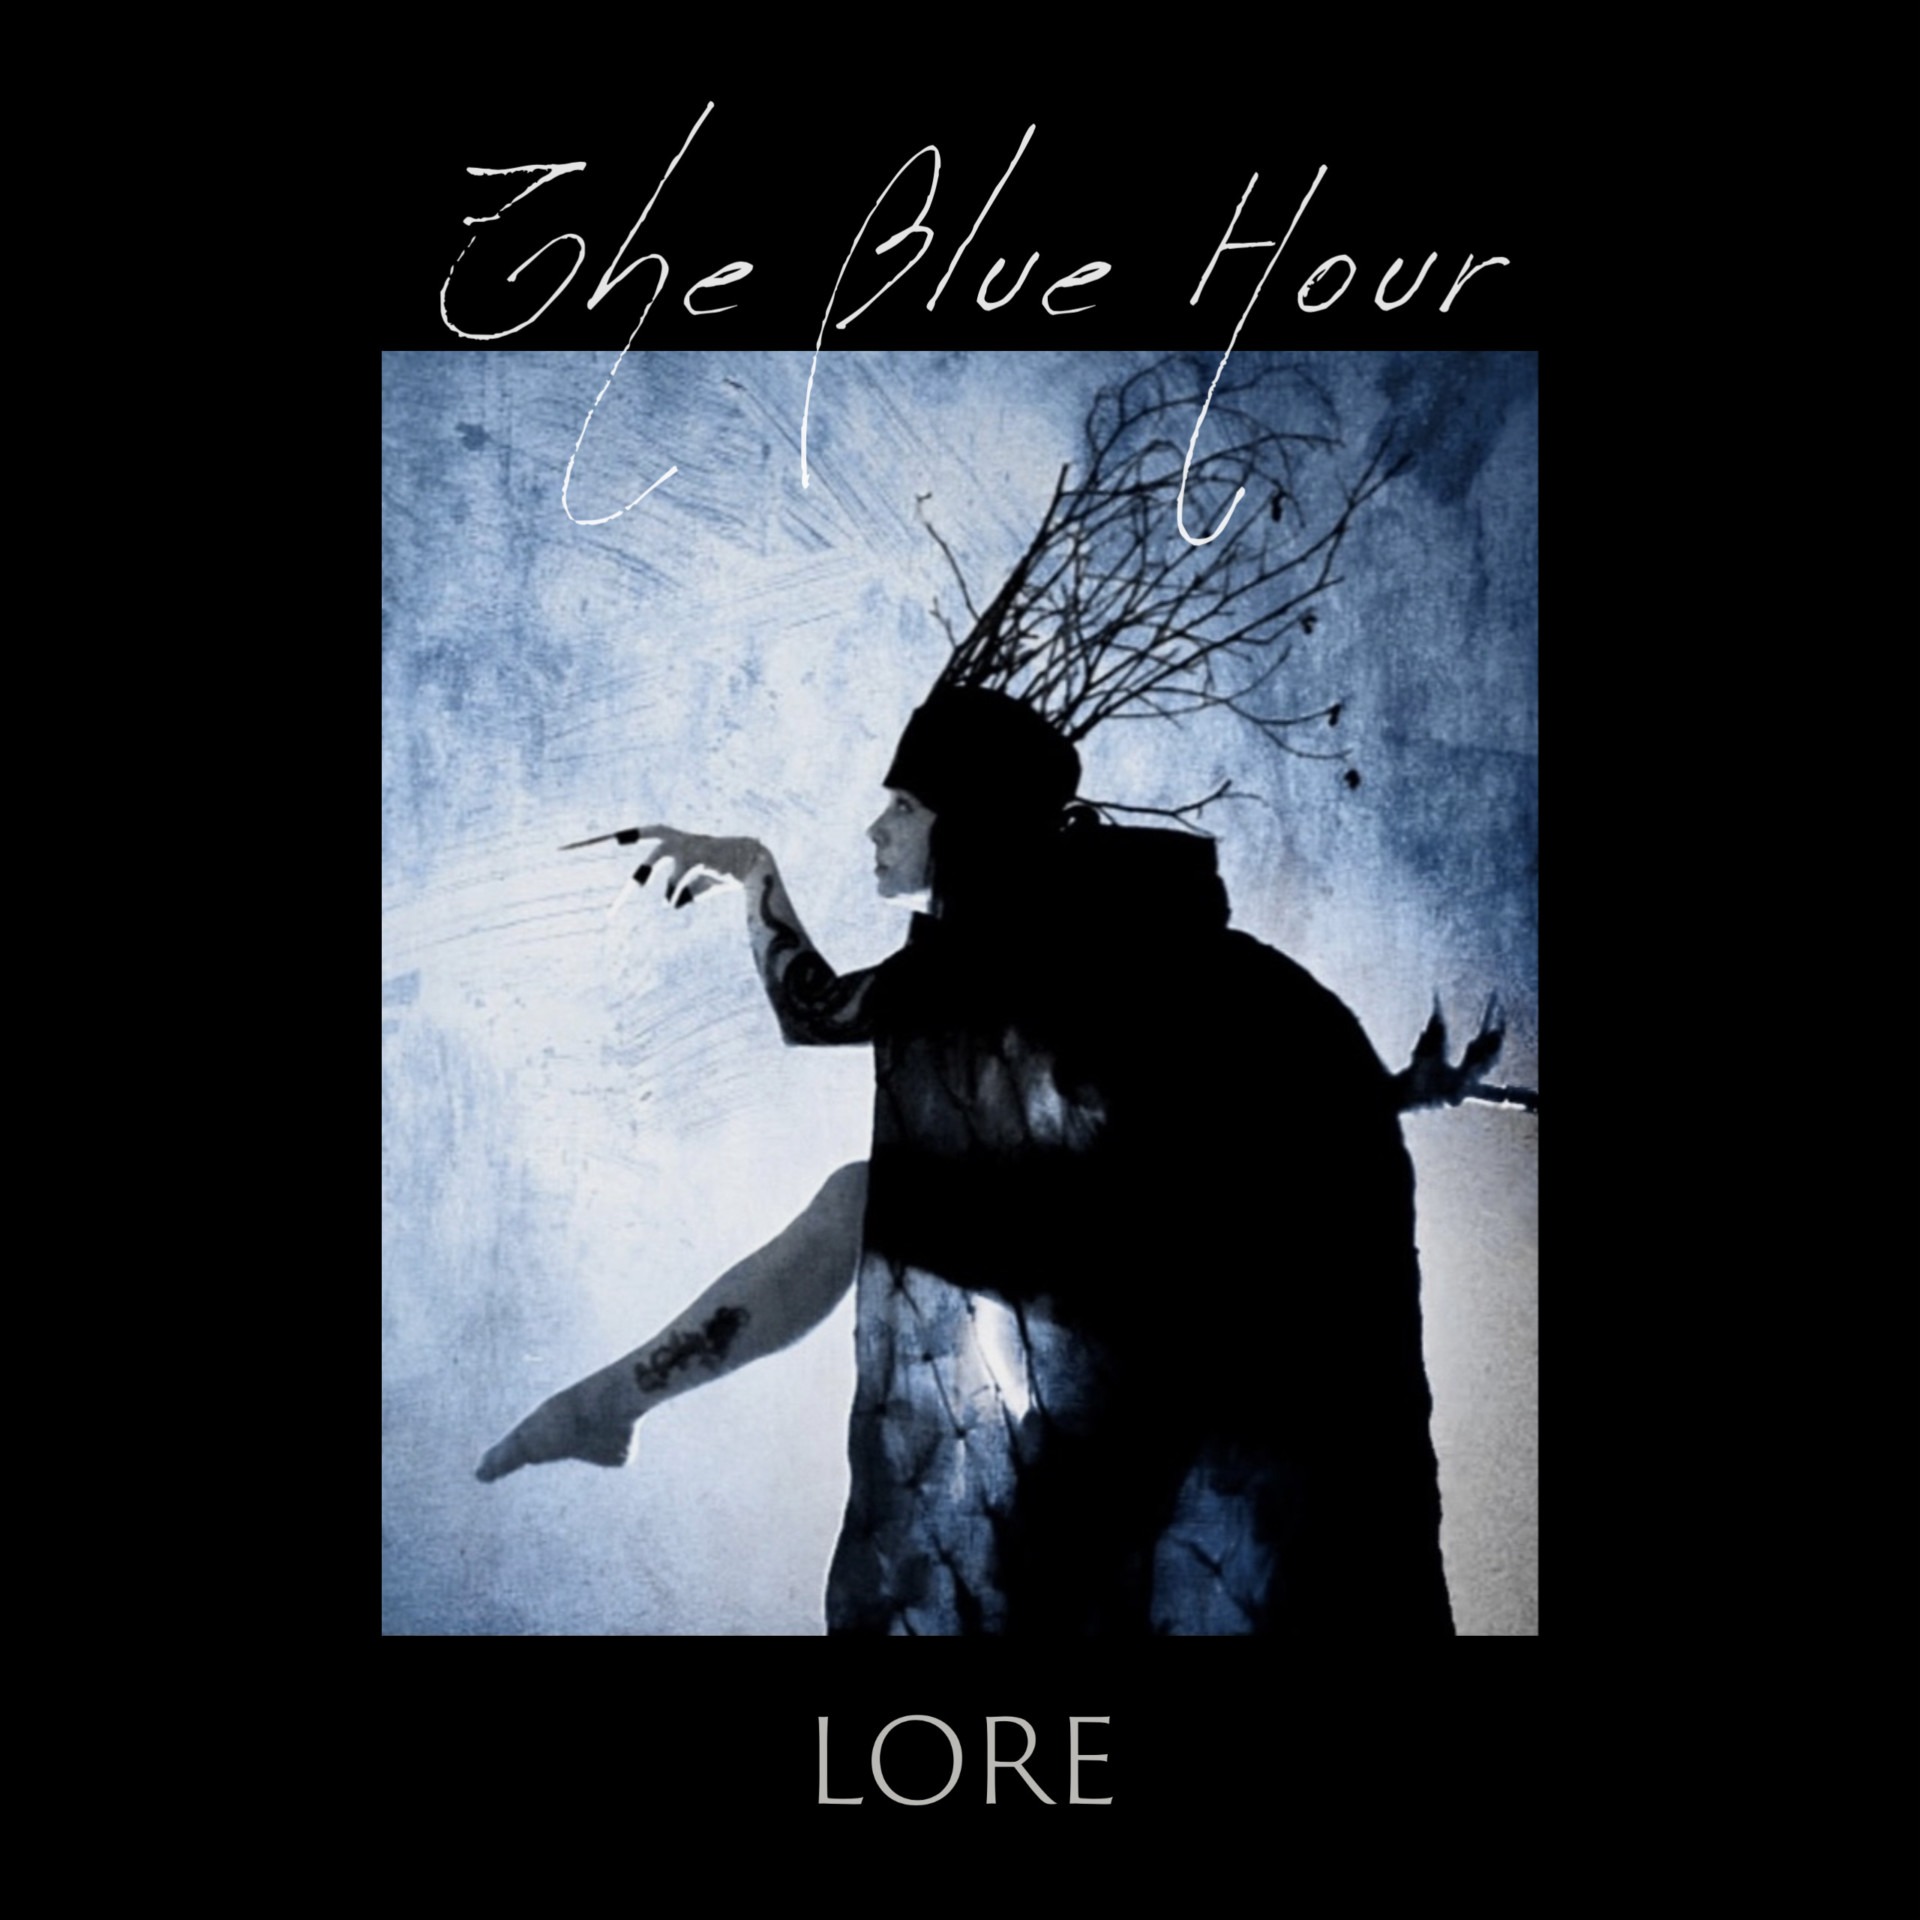 The Blue Hour’s Lore is a Dark Wave journey